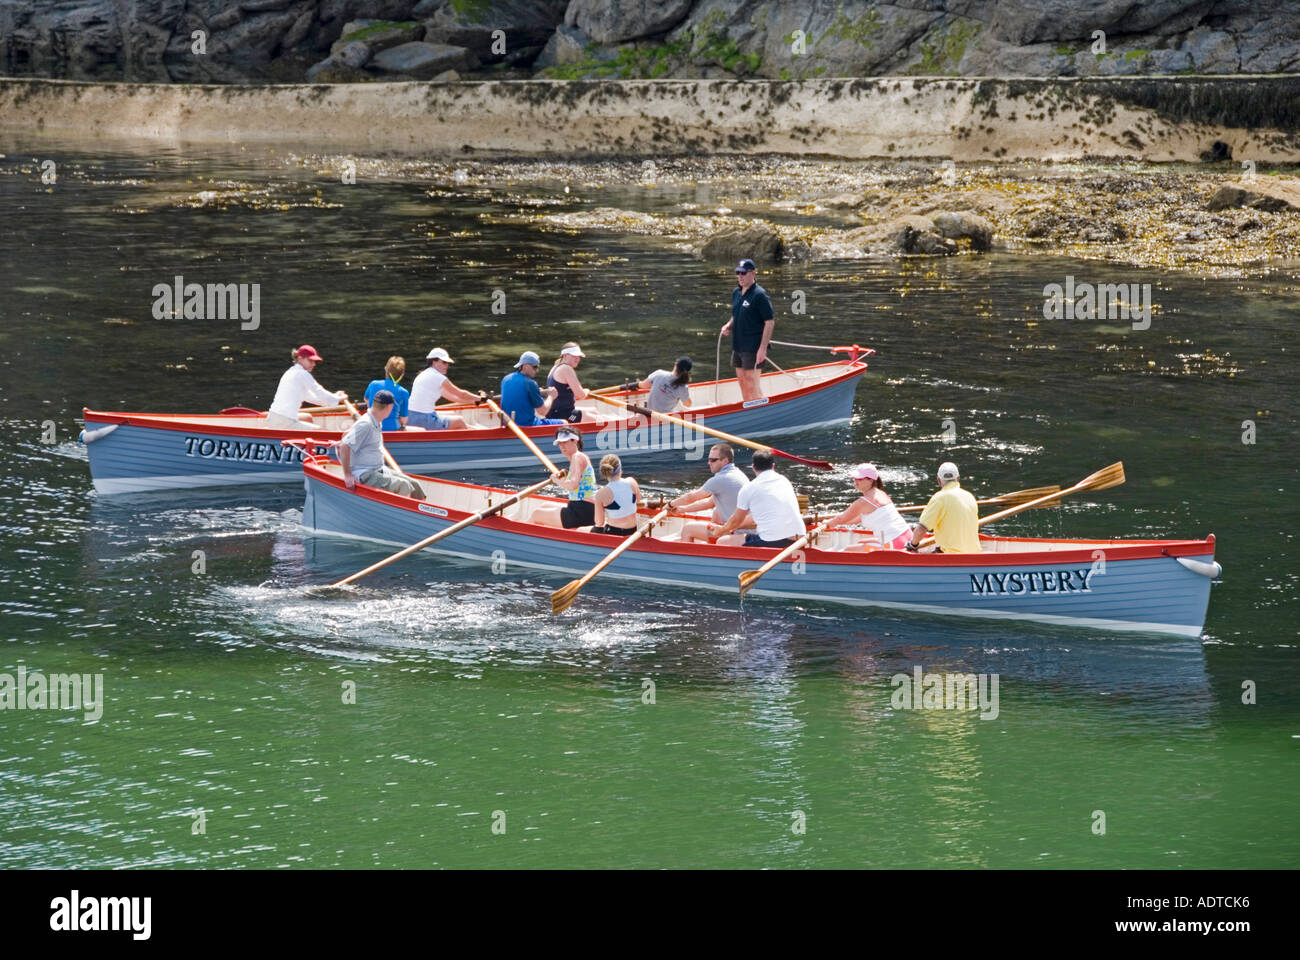 Charlestown waterfront mixed crew rowers two of a kind long pilot gig row boats prepare to race out to sea & back near St Austell Cornwall England UK Stock Photo